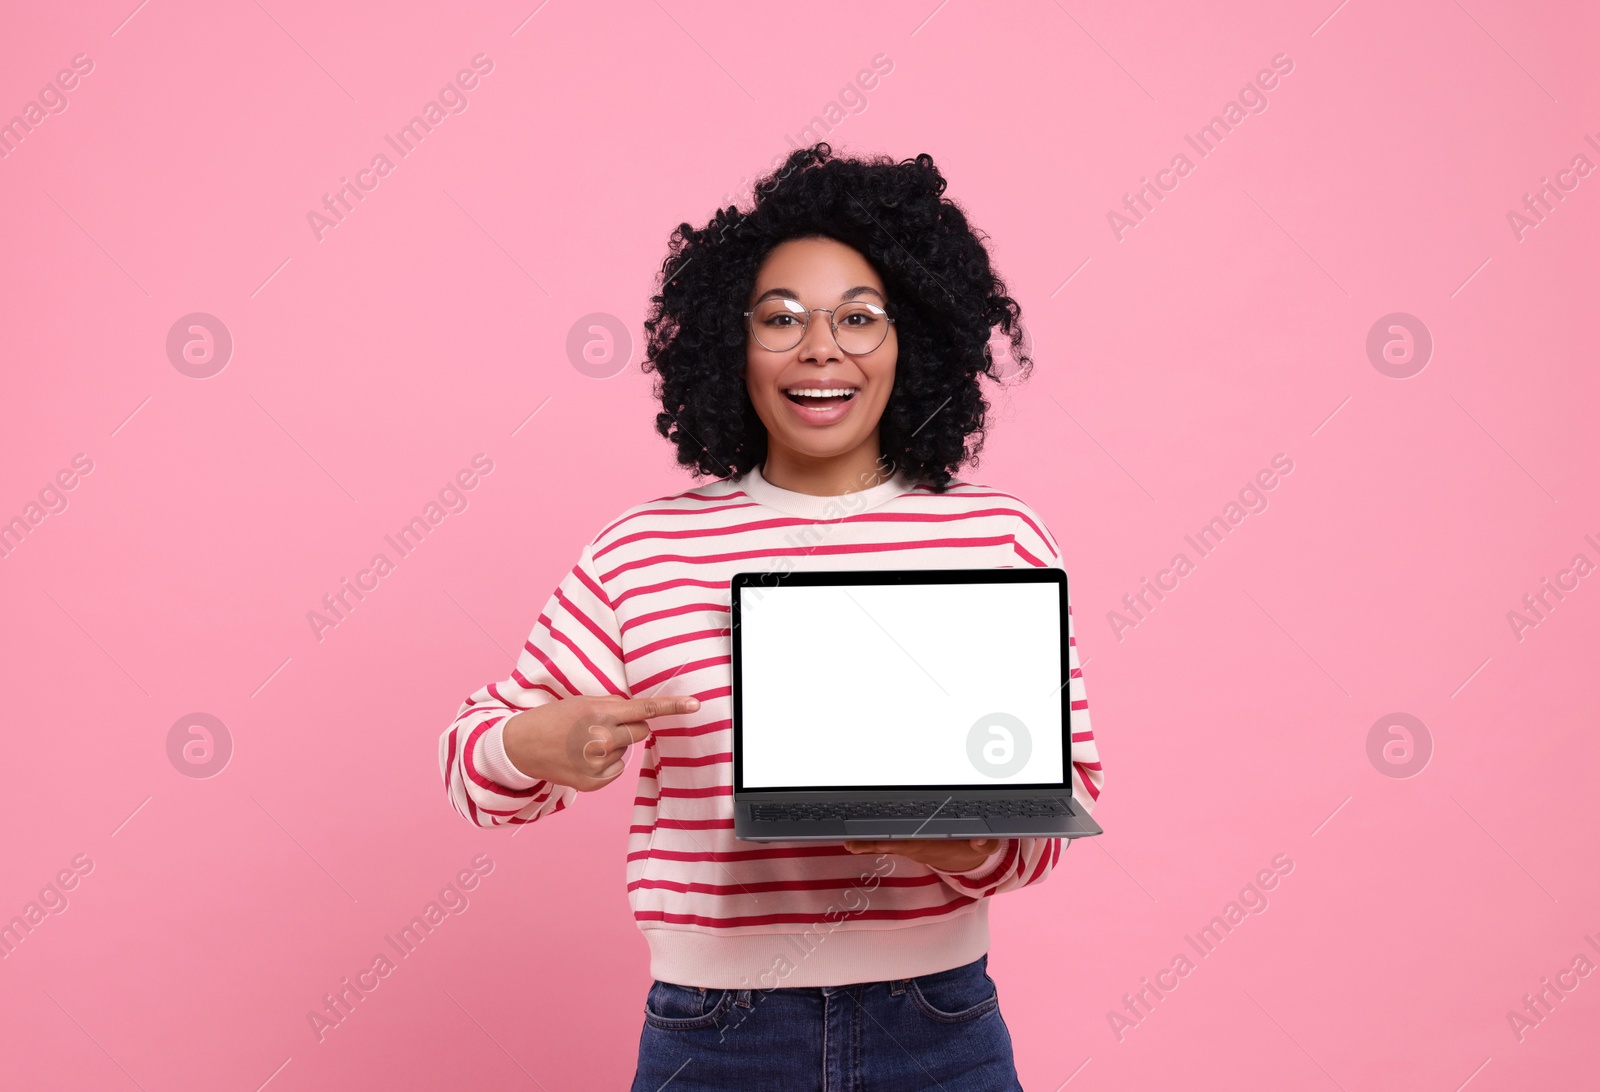 Photo of Happy young woman showing laptop on pink background